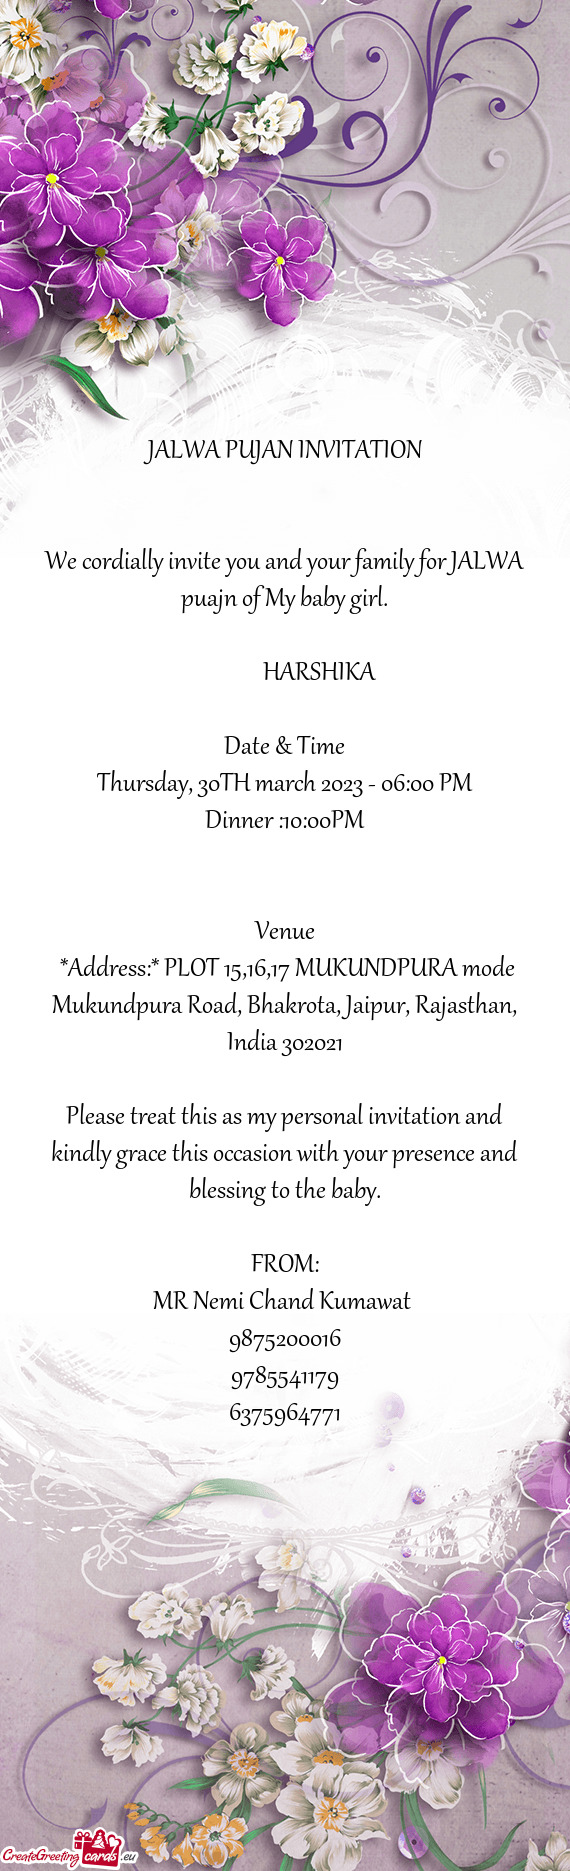 We cordially invite you and your family for JALWA puajn of My baby girl